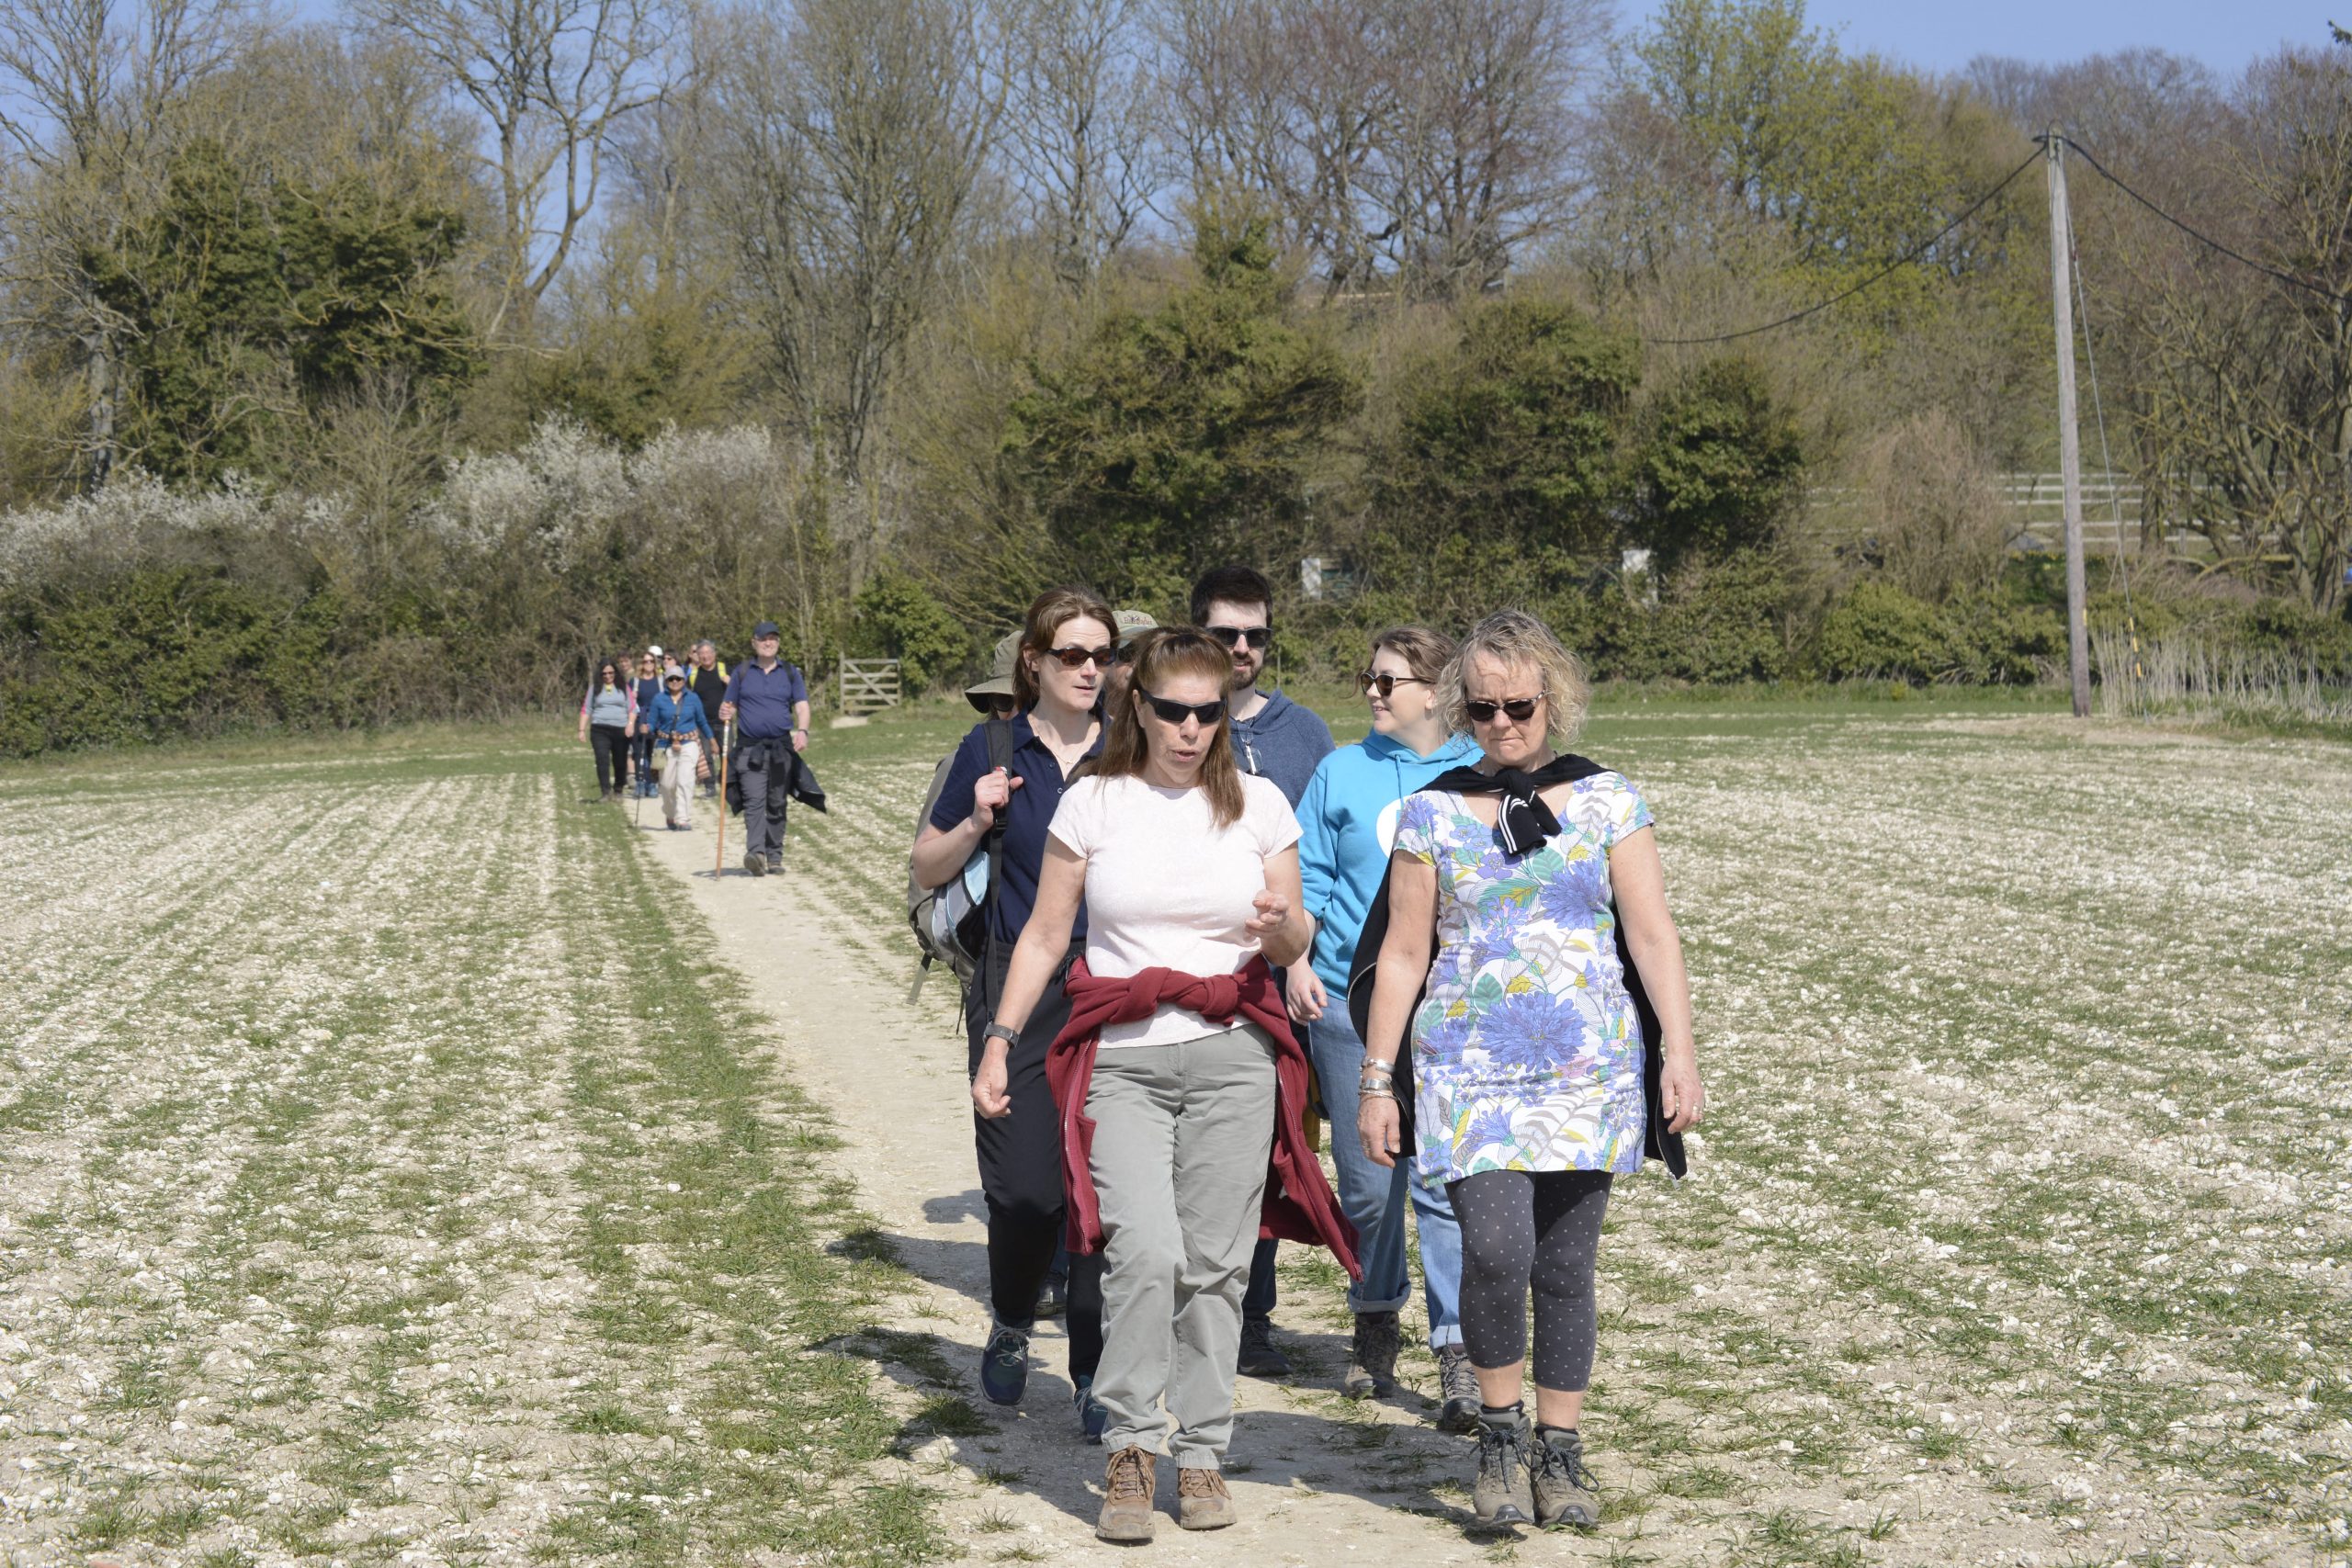 A group of walkers on a path across a field